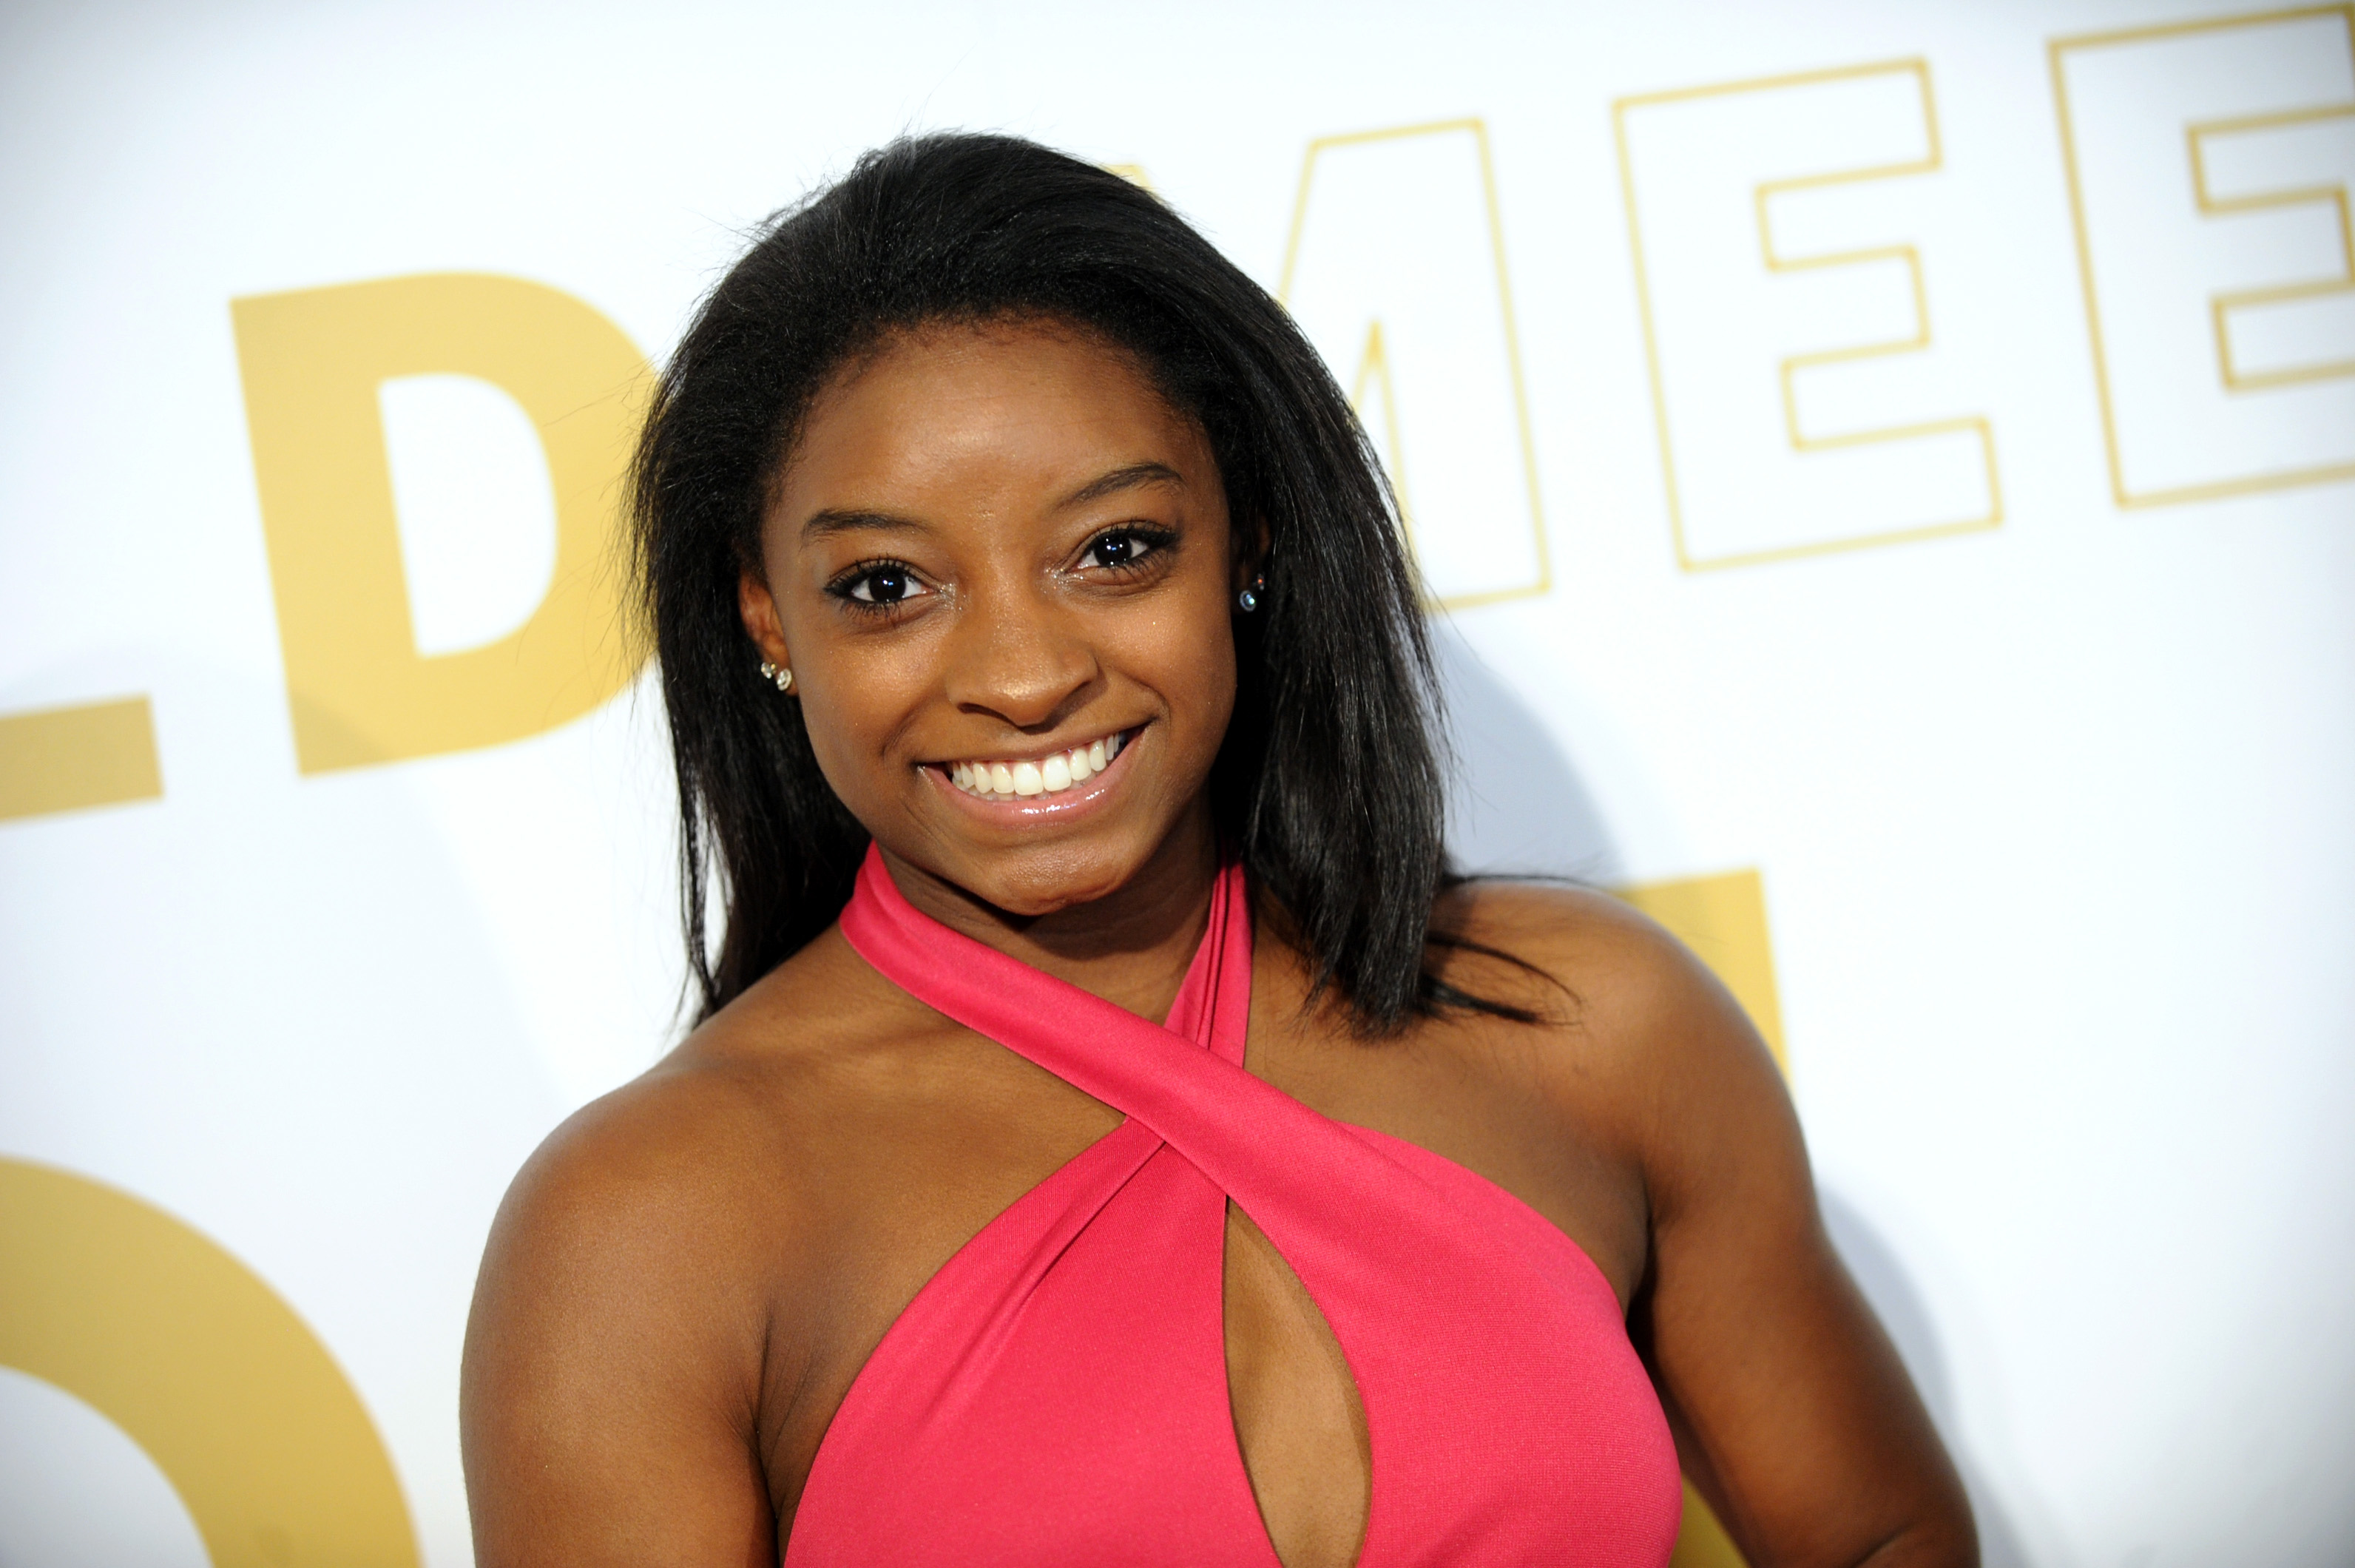 Olympic athlete Simone Biles attends Life is Good at GOLD MEETS GOLDEN Event at Equinox on Jan. 7, 2017 in Los Angeles, Calif. (Emma McIntyre&mdash;Getty Images)